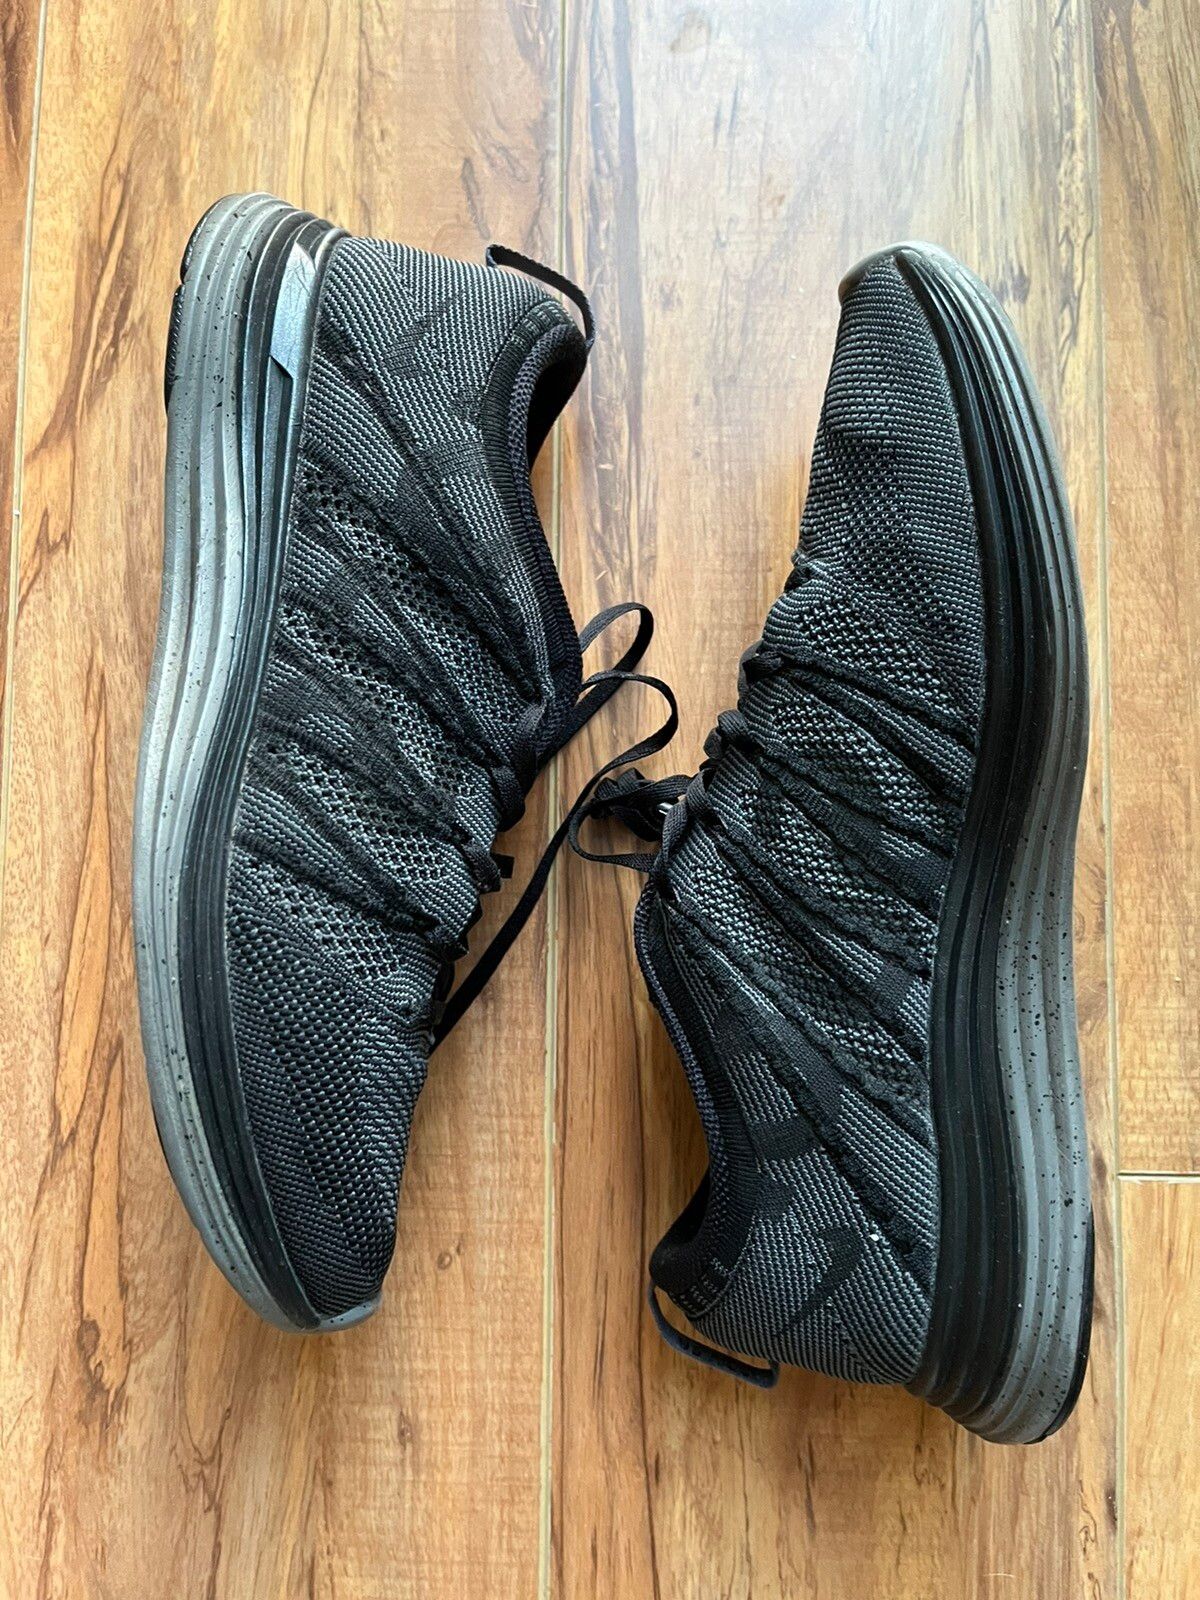 Pre-owned Nike X Supreme Flyknit Lunar1+ Black 2013 Shoes